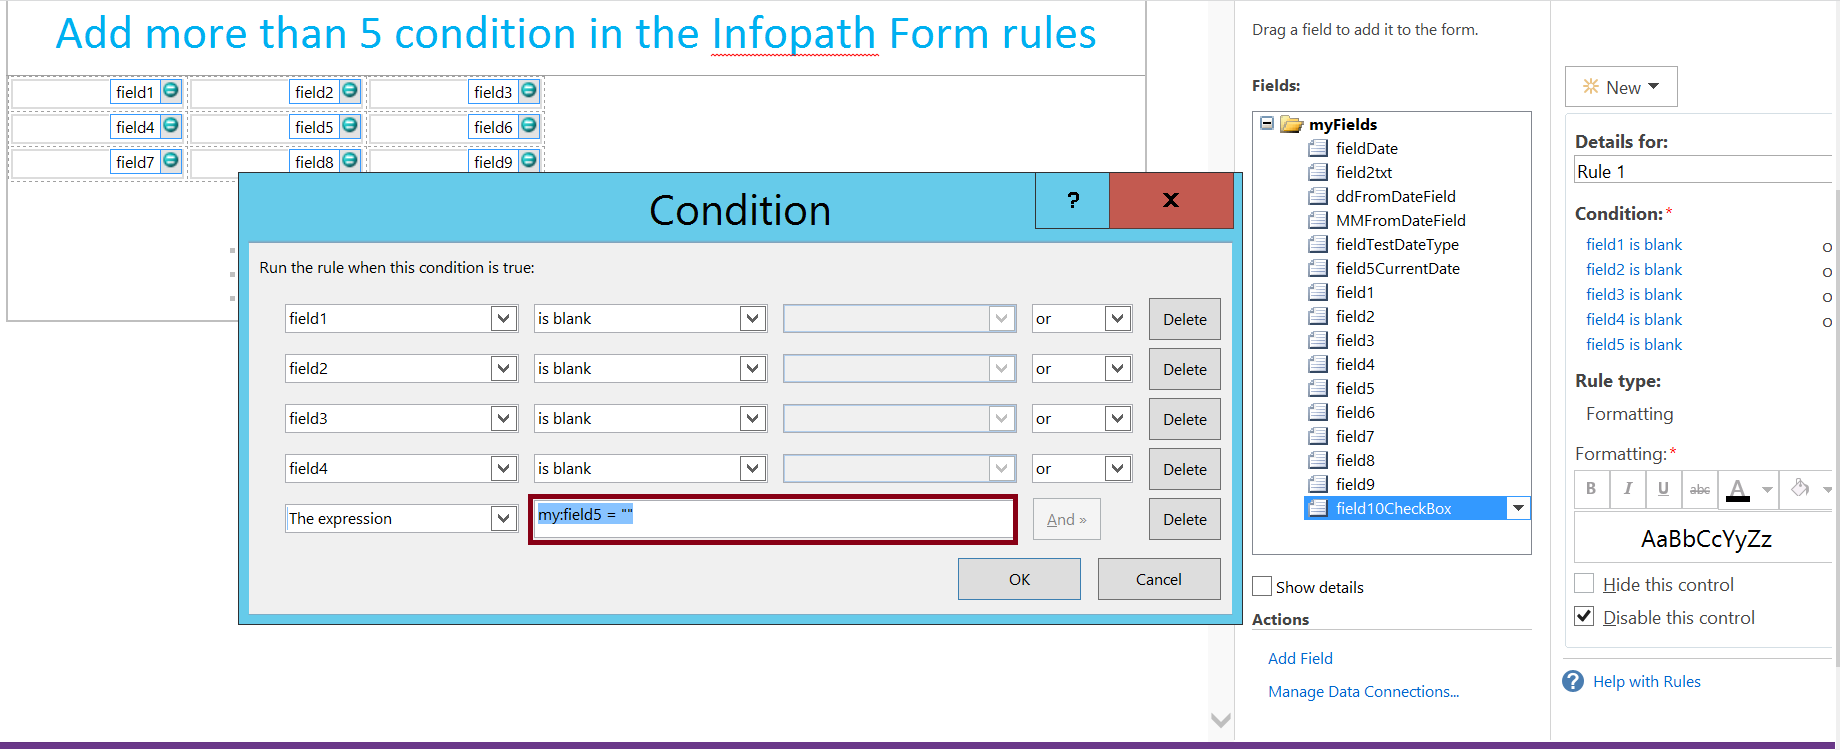 Add more than five conditions in the Infopath form rule - The expression box